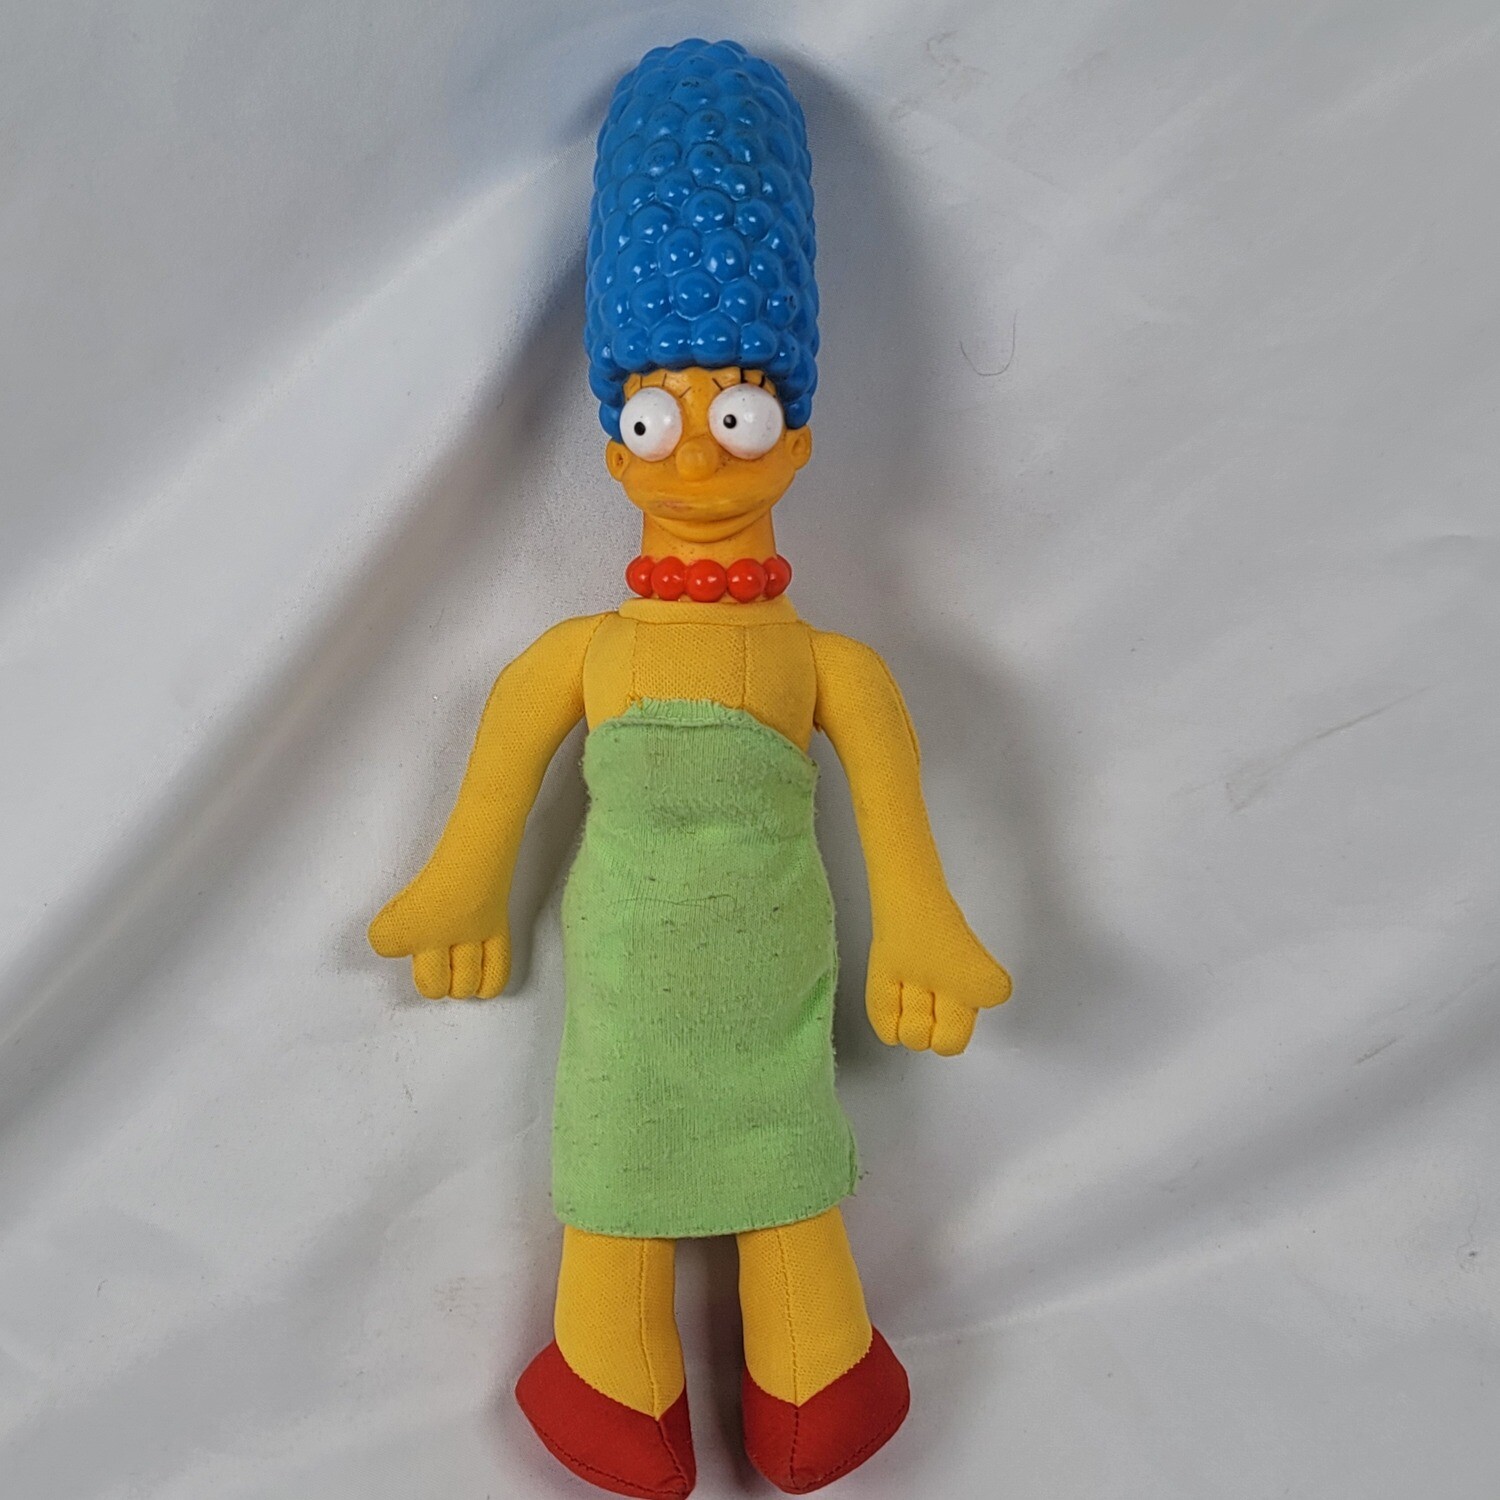 The Simpsons Marge Vintage Plush Doll